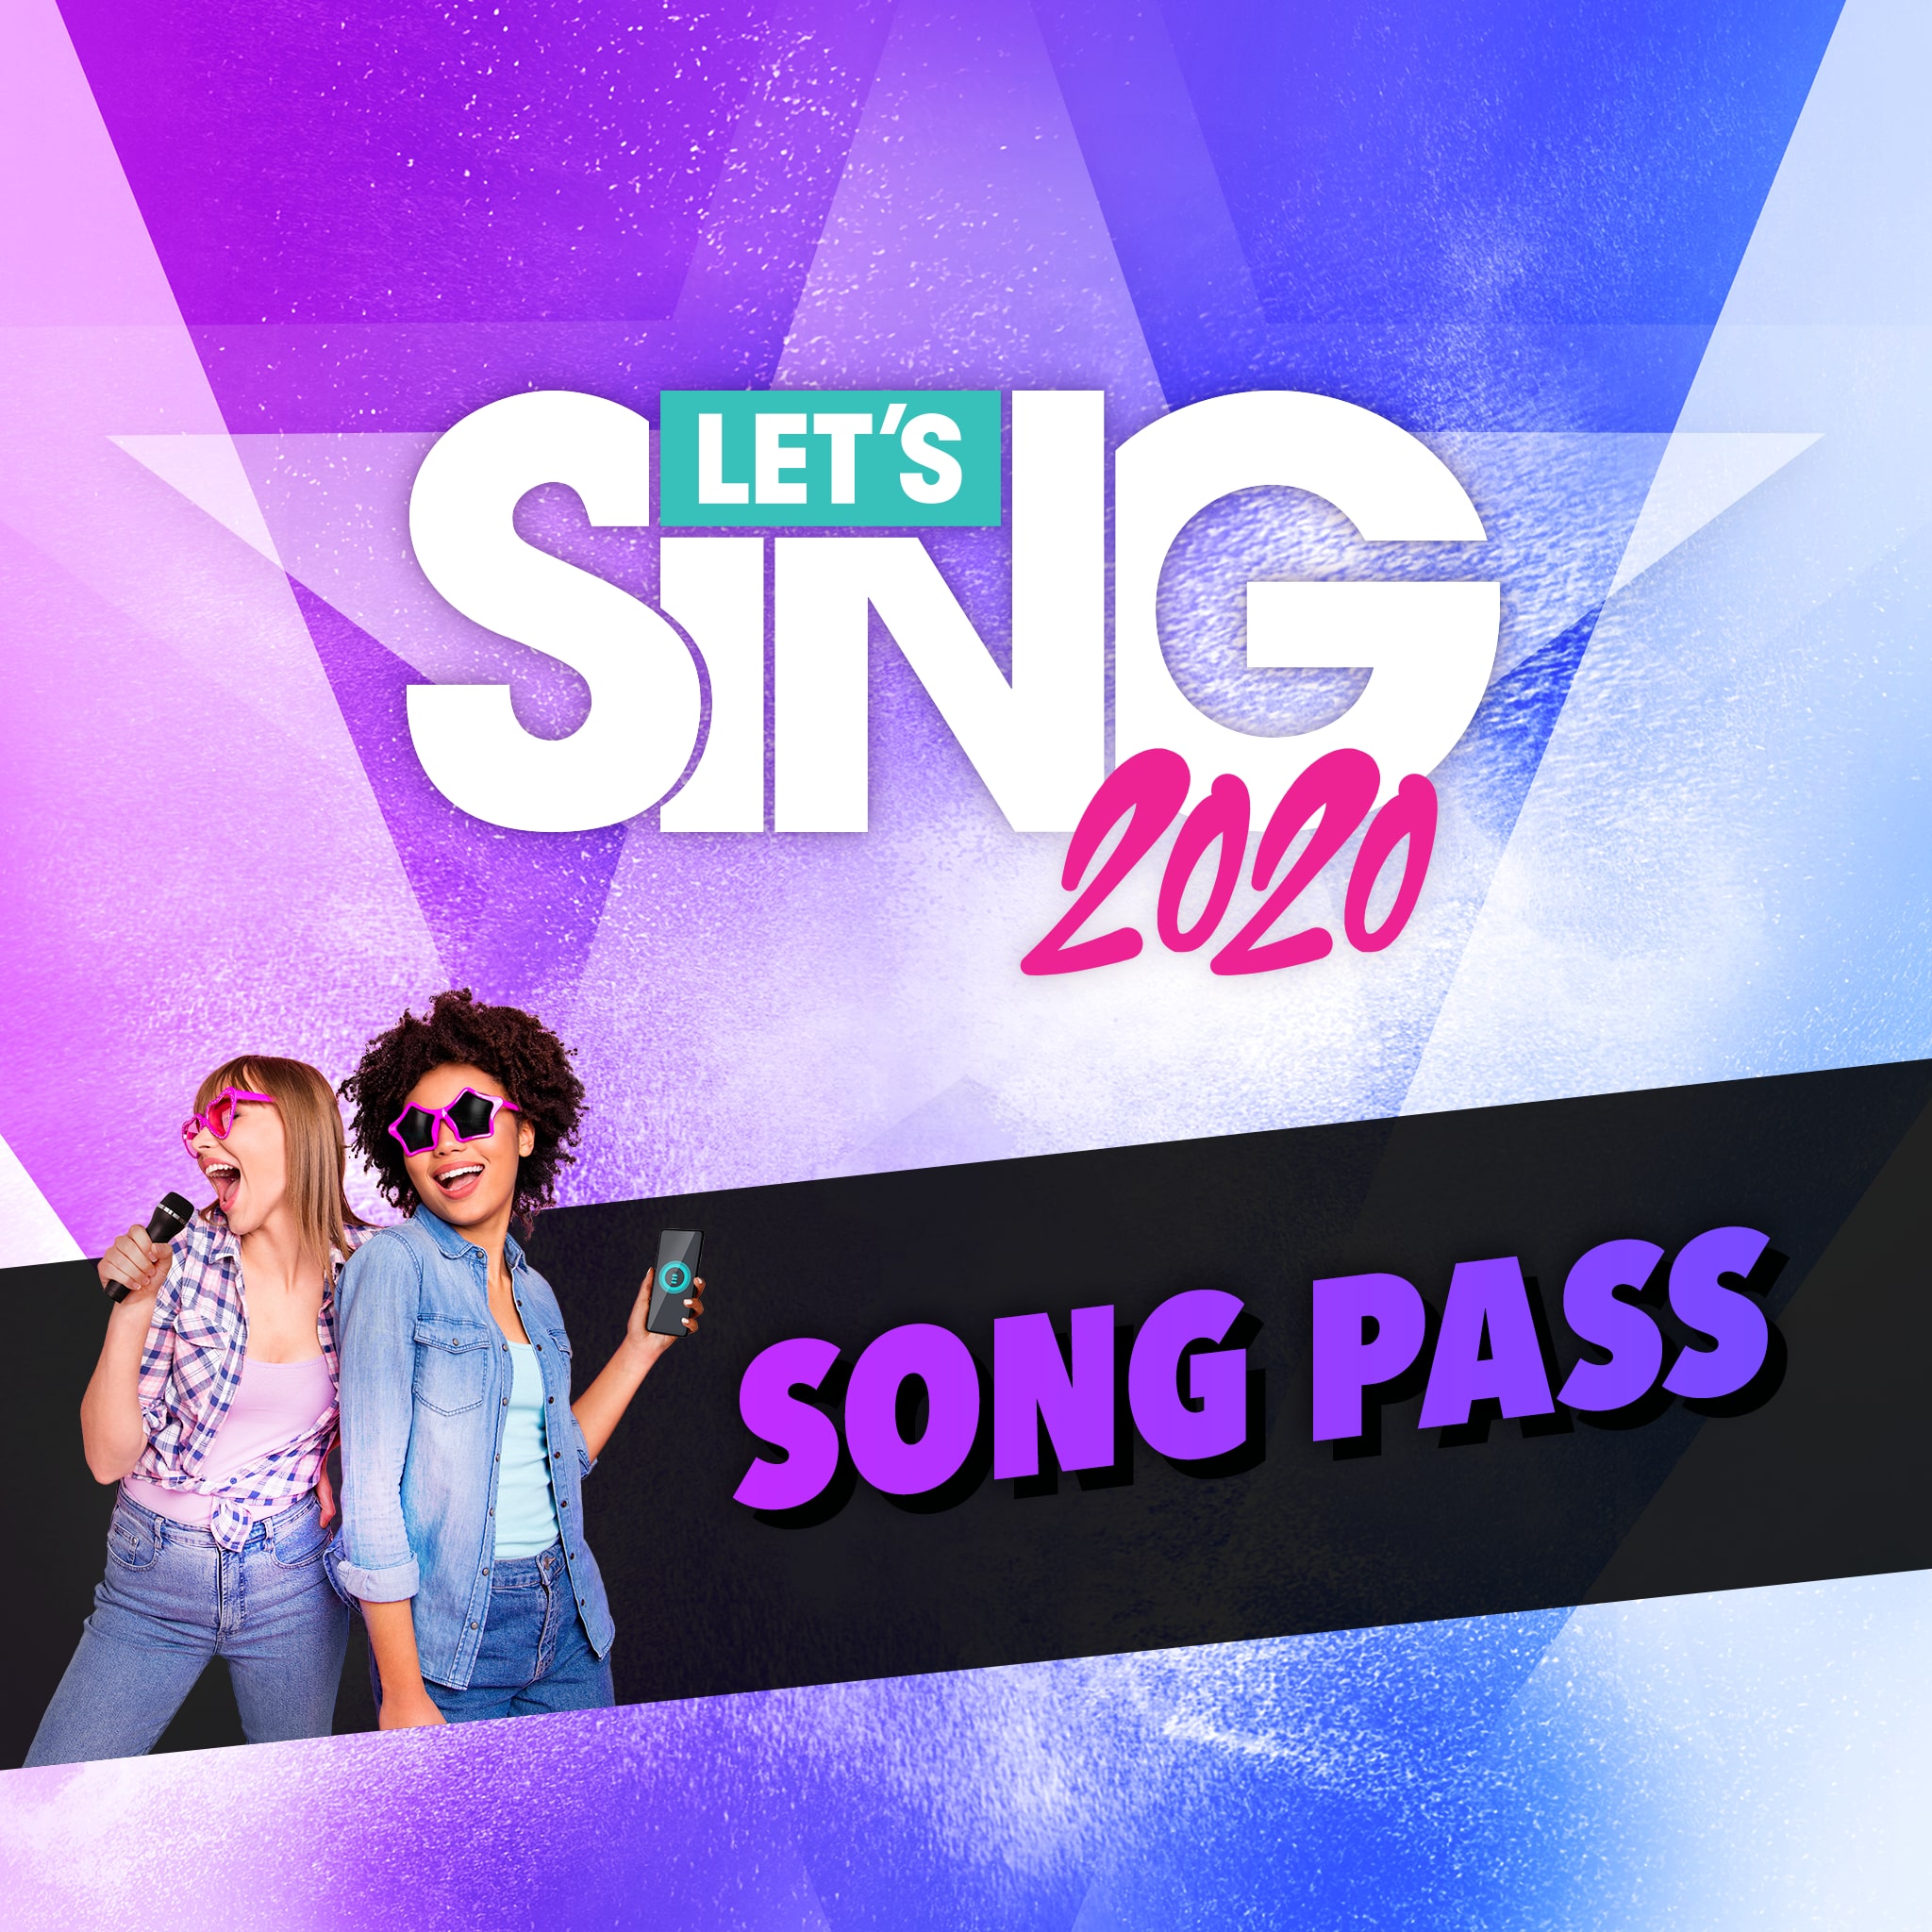 Let's Sing 2020 - Song Pass